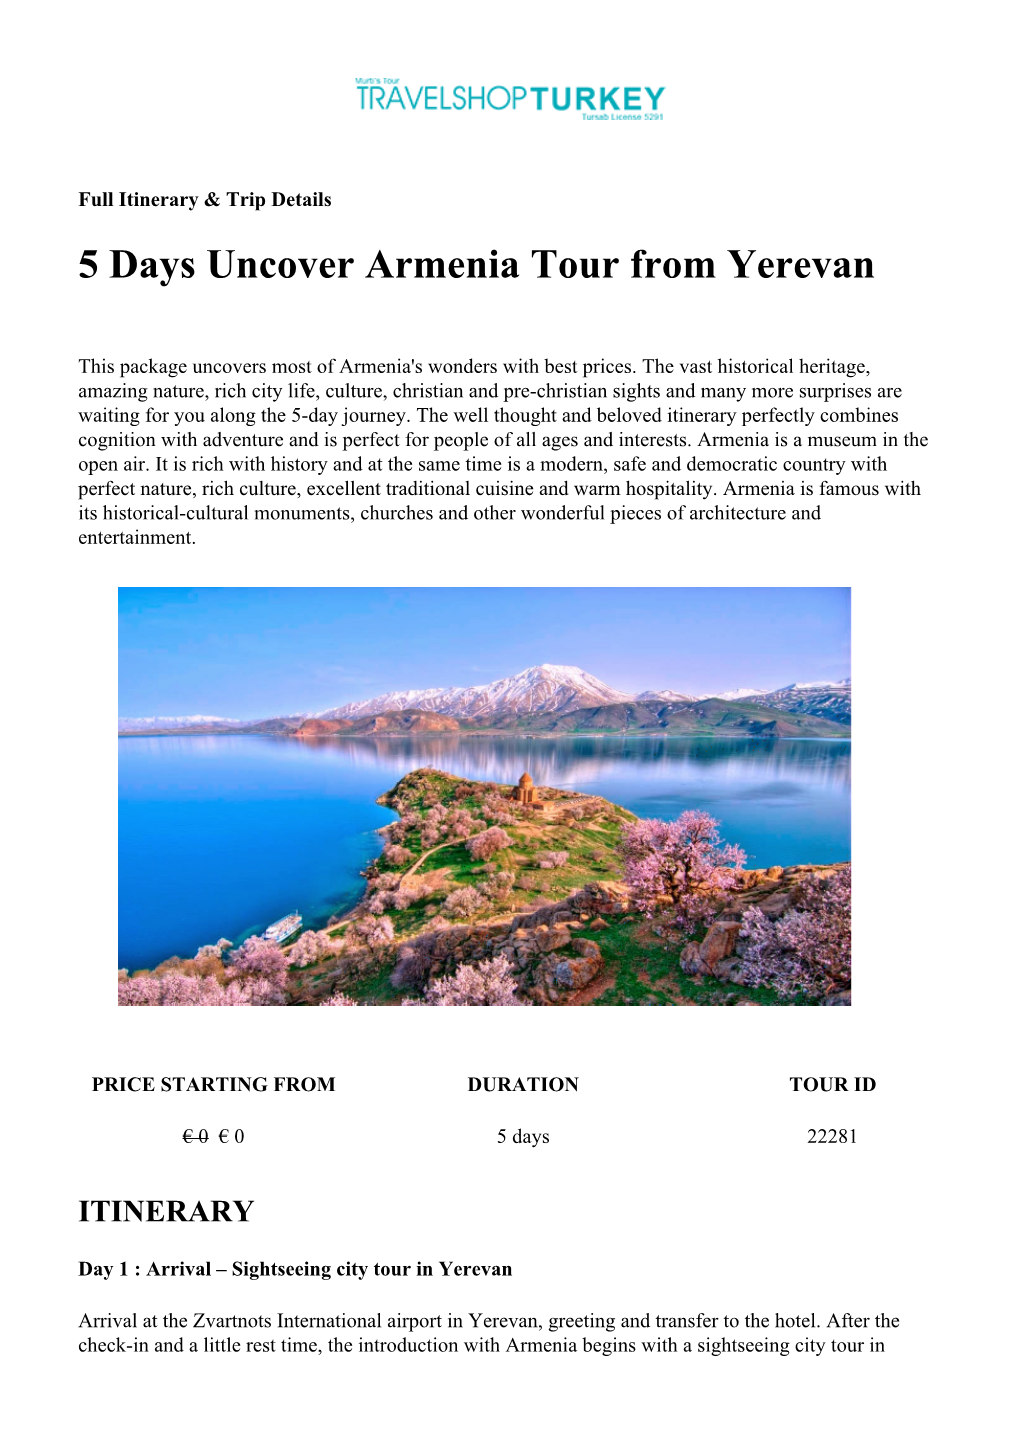 5 Days Uncover Armenia Tour from Yerevan